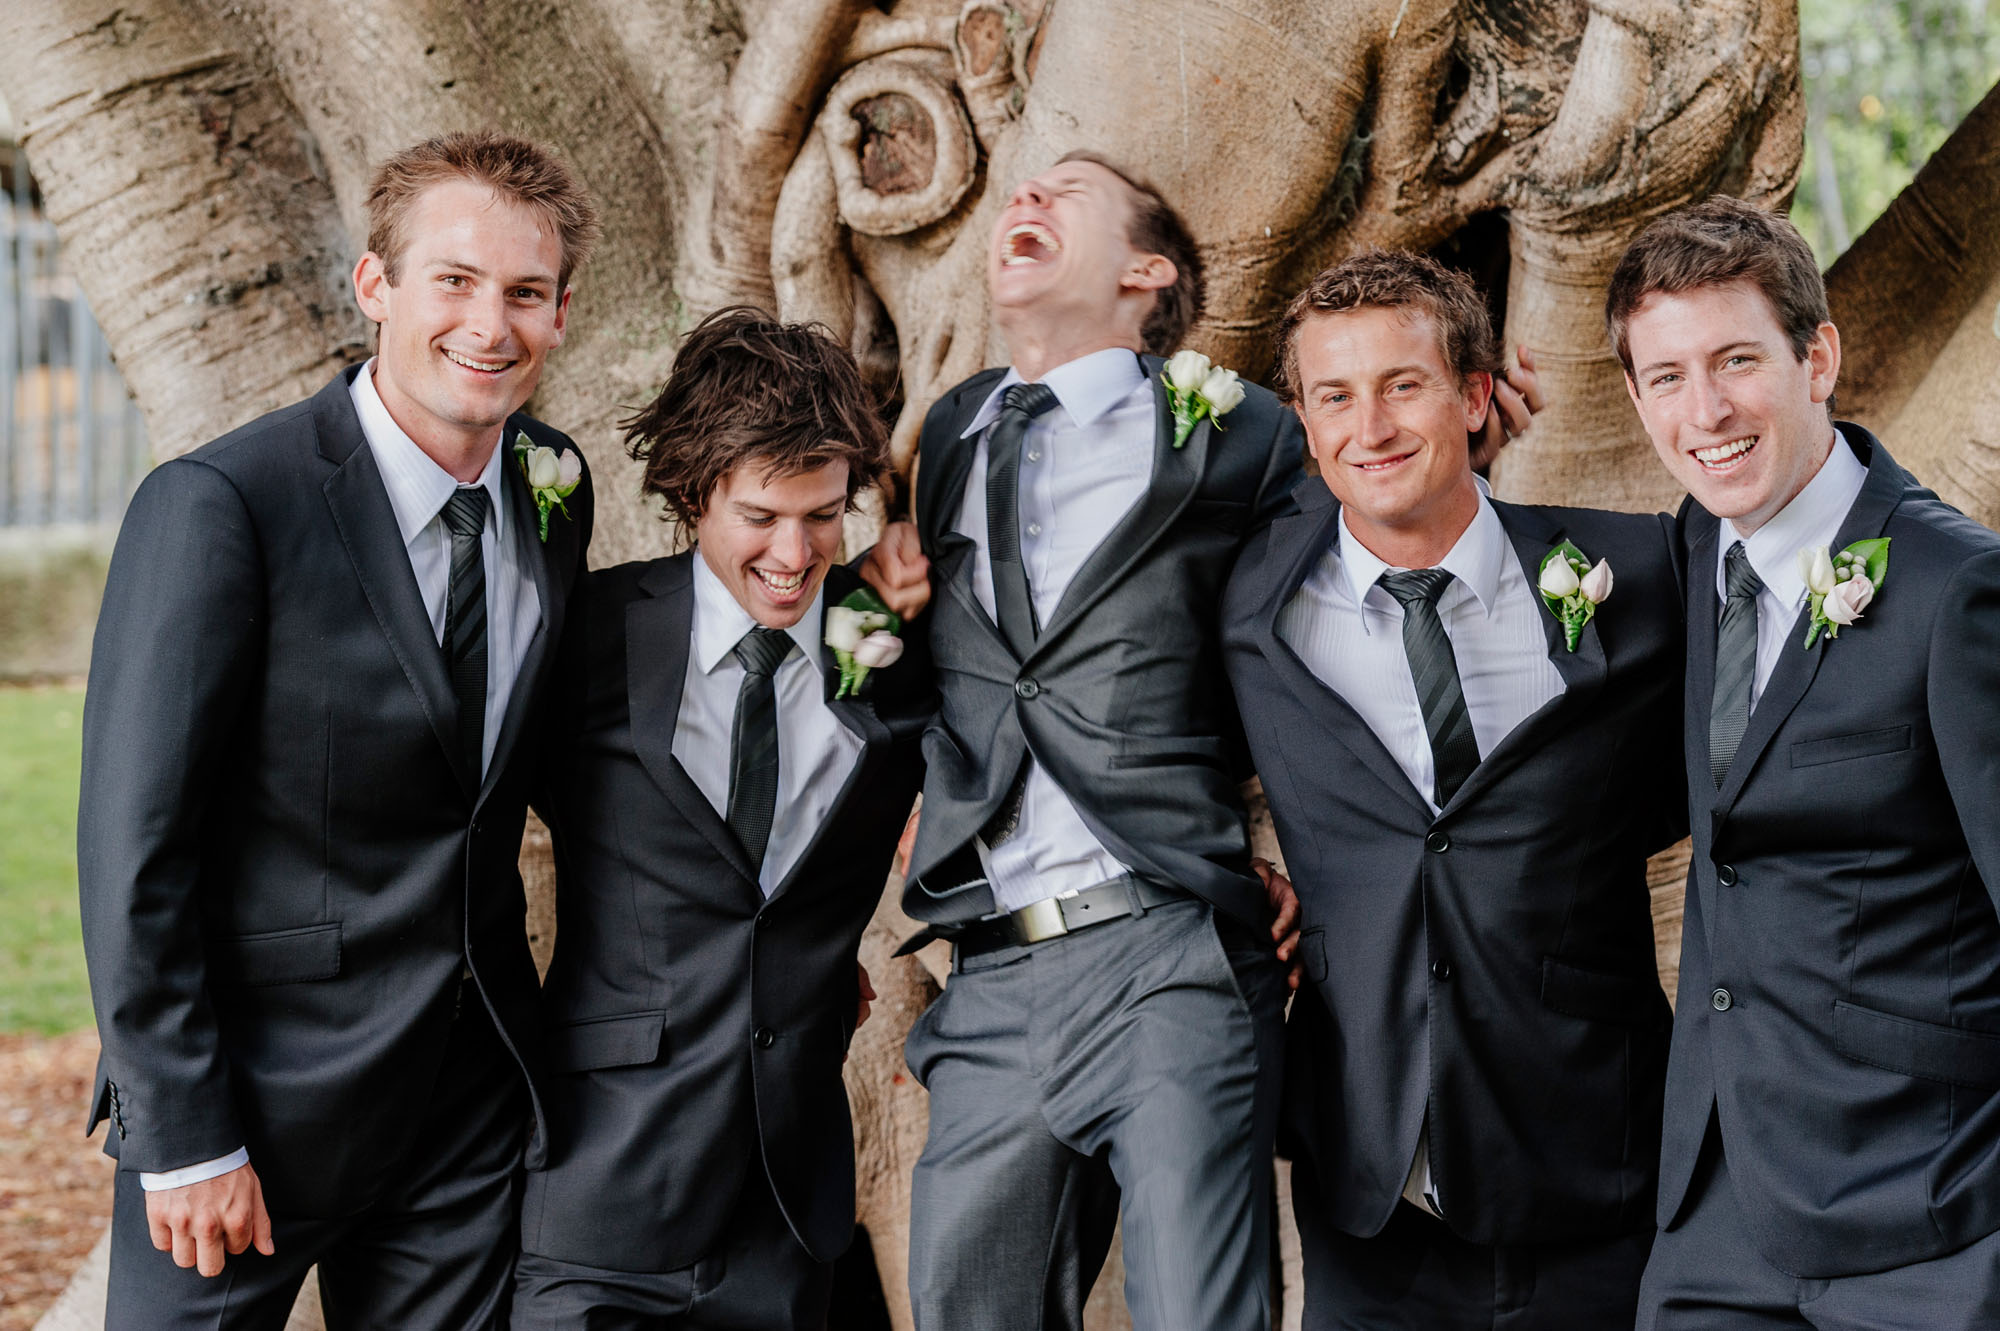 Groom reacting to being tickled